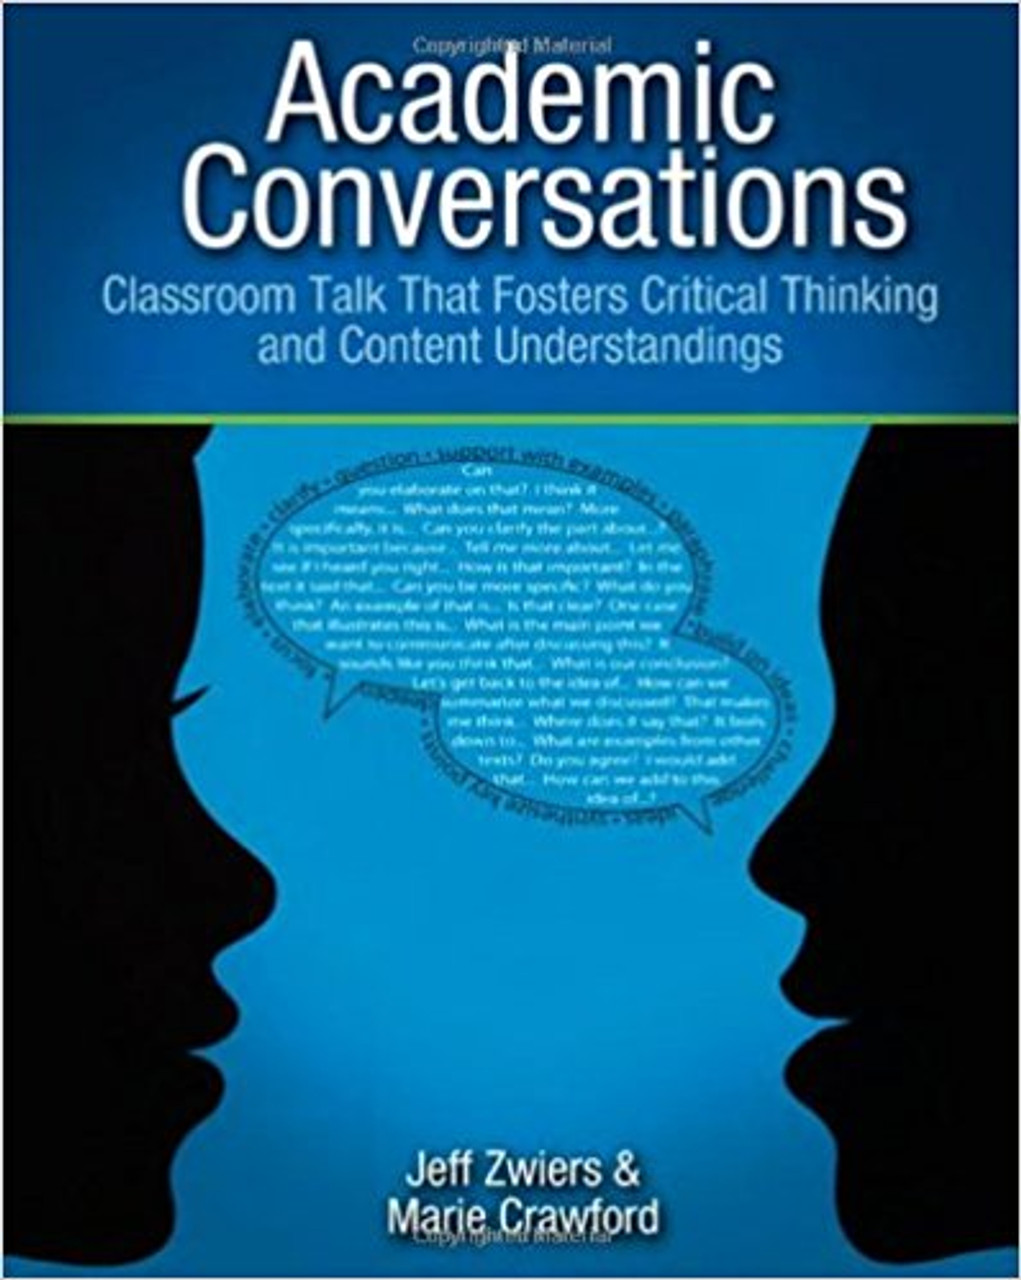 Academic Conversations: Classroom Talk That Fosters Critical Thinking and Content Understandings by Jeff Zwiers